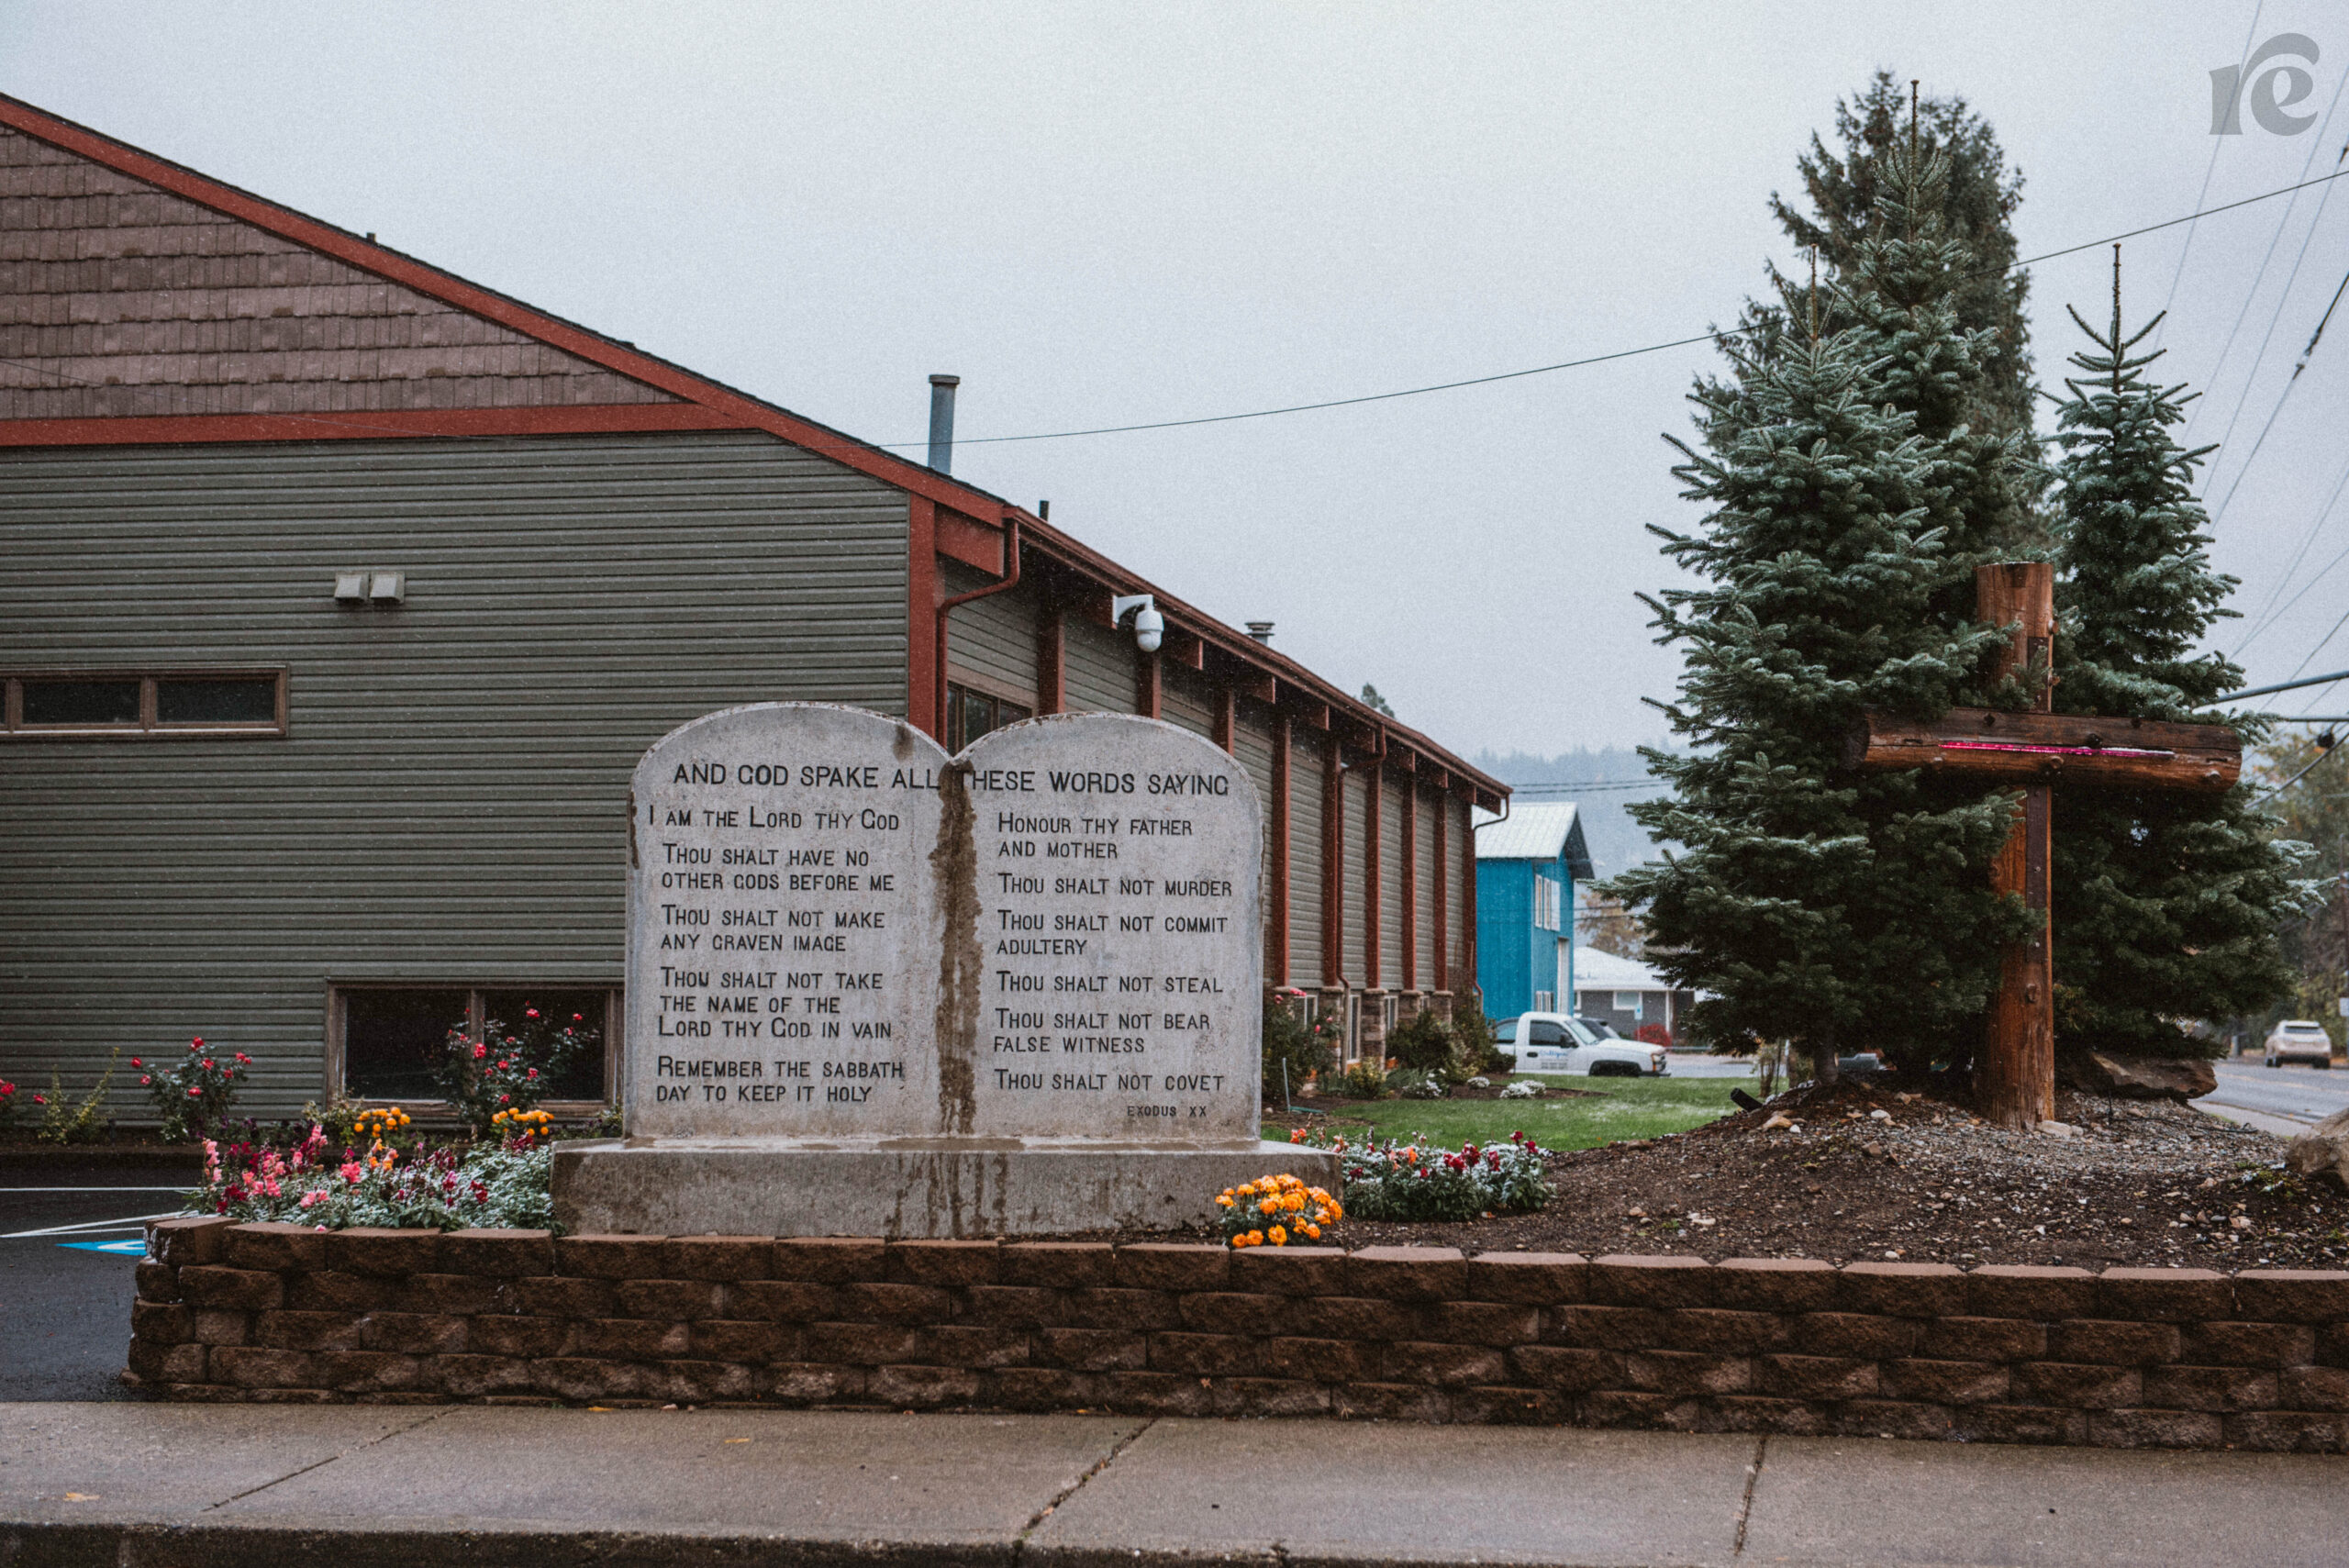 A tombstone-esque version of the tablets featuring the ten commandments outside Alter Church in Coeur D'Alene, Idaho.